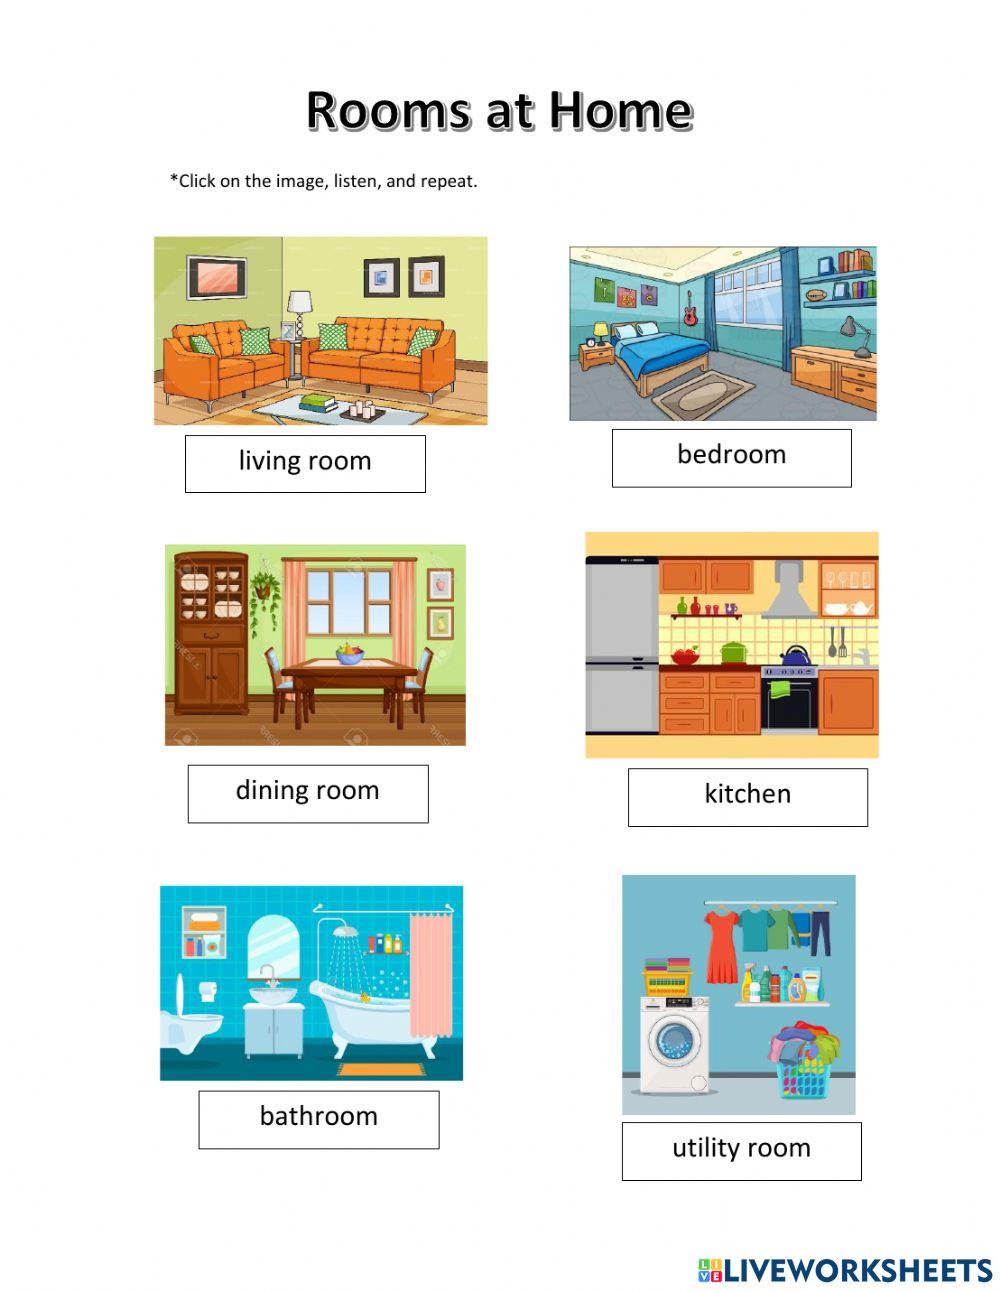 rooms in a house vocabulary